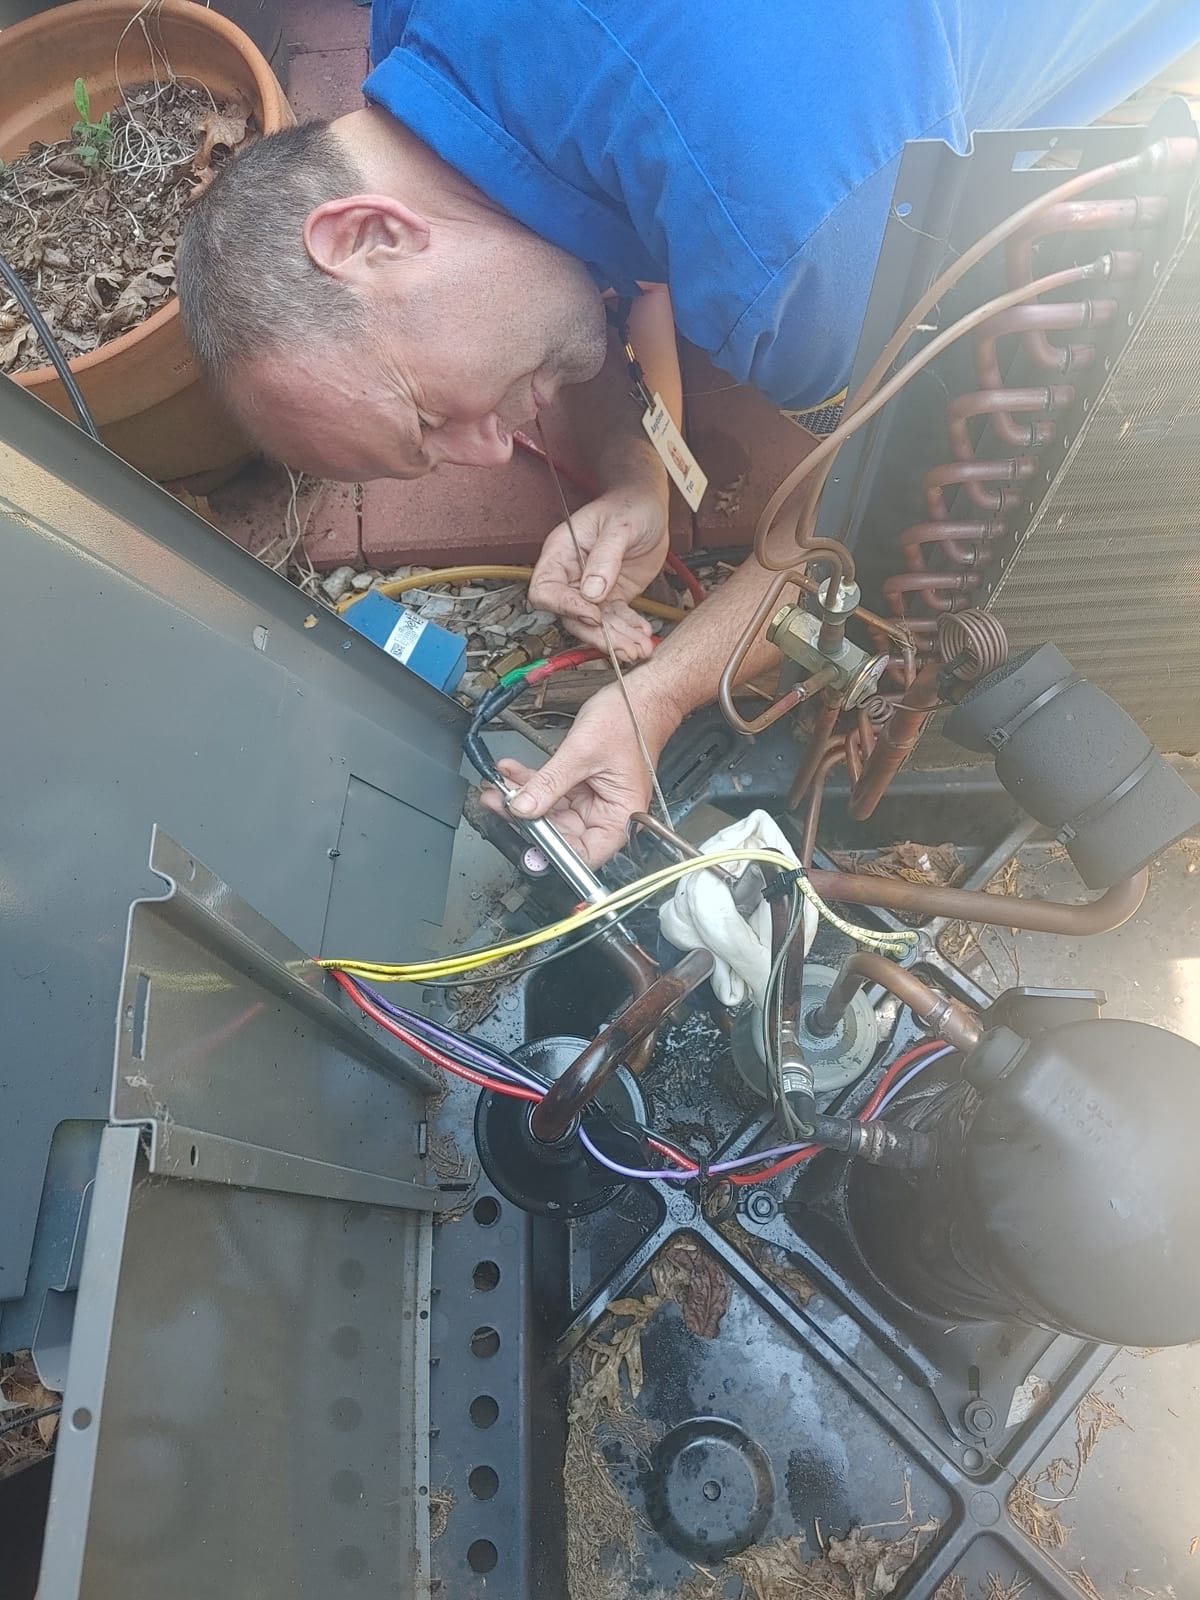 A technician is repairing internal components of an air conditioning unit outdoors.